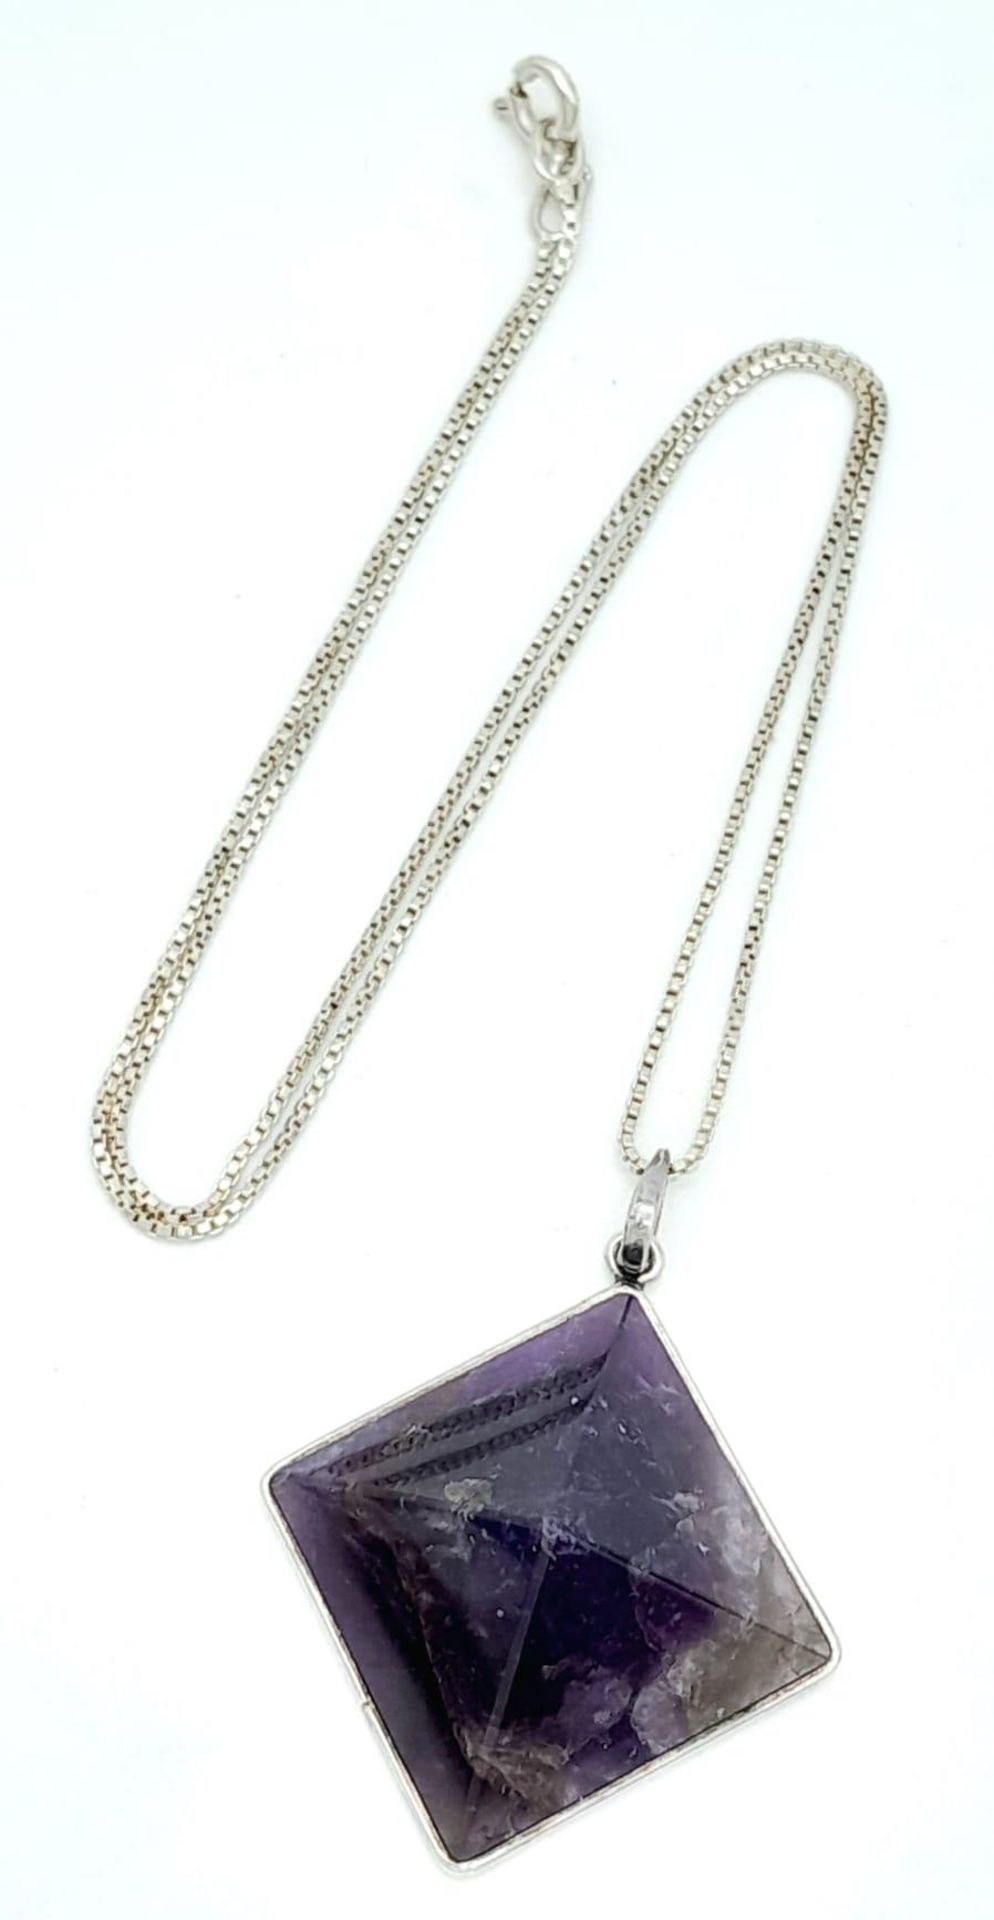 A Sterling Silver Pyramid Cut Amethyst Pendant Necklace. 37cm Length. Amethyst Measures 2cm Width. - Image 2 of 10